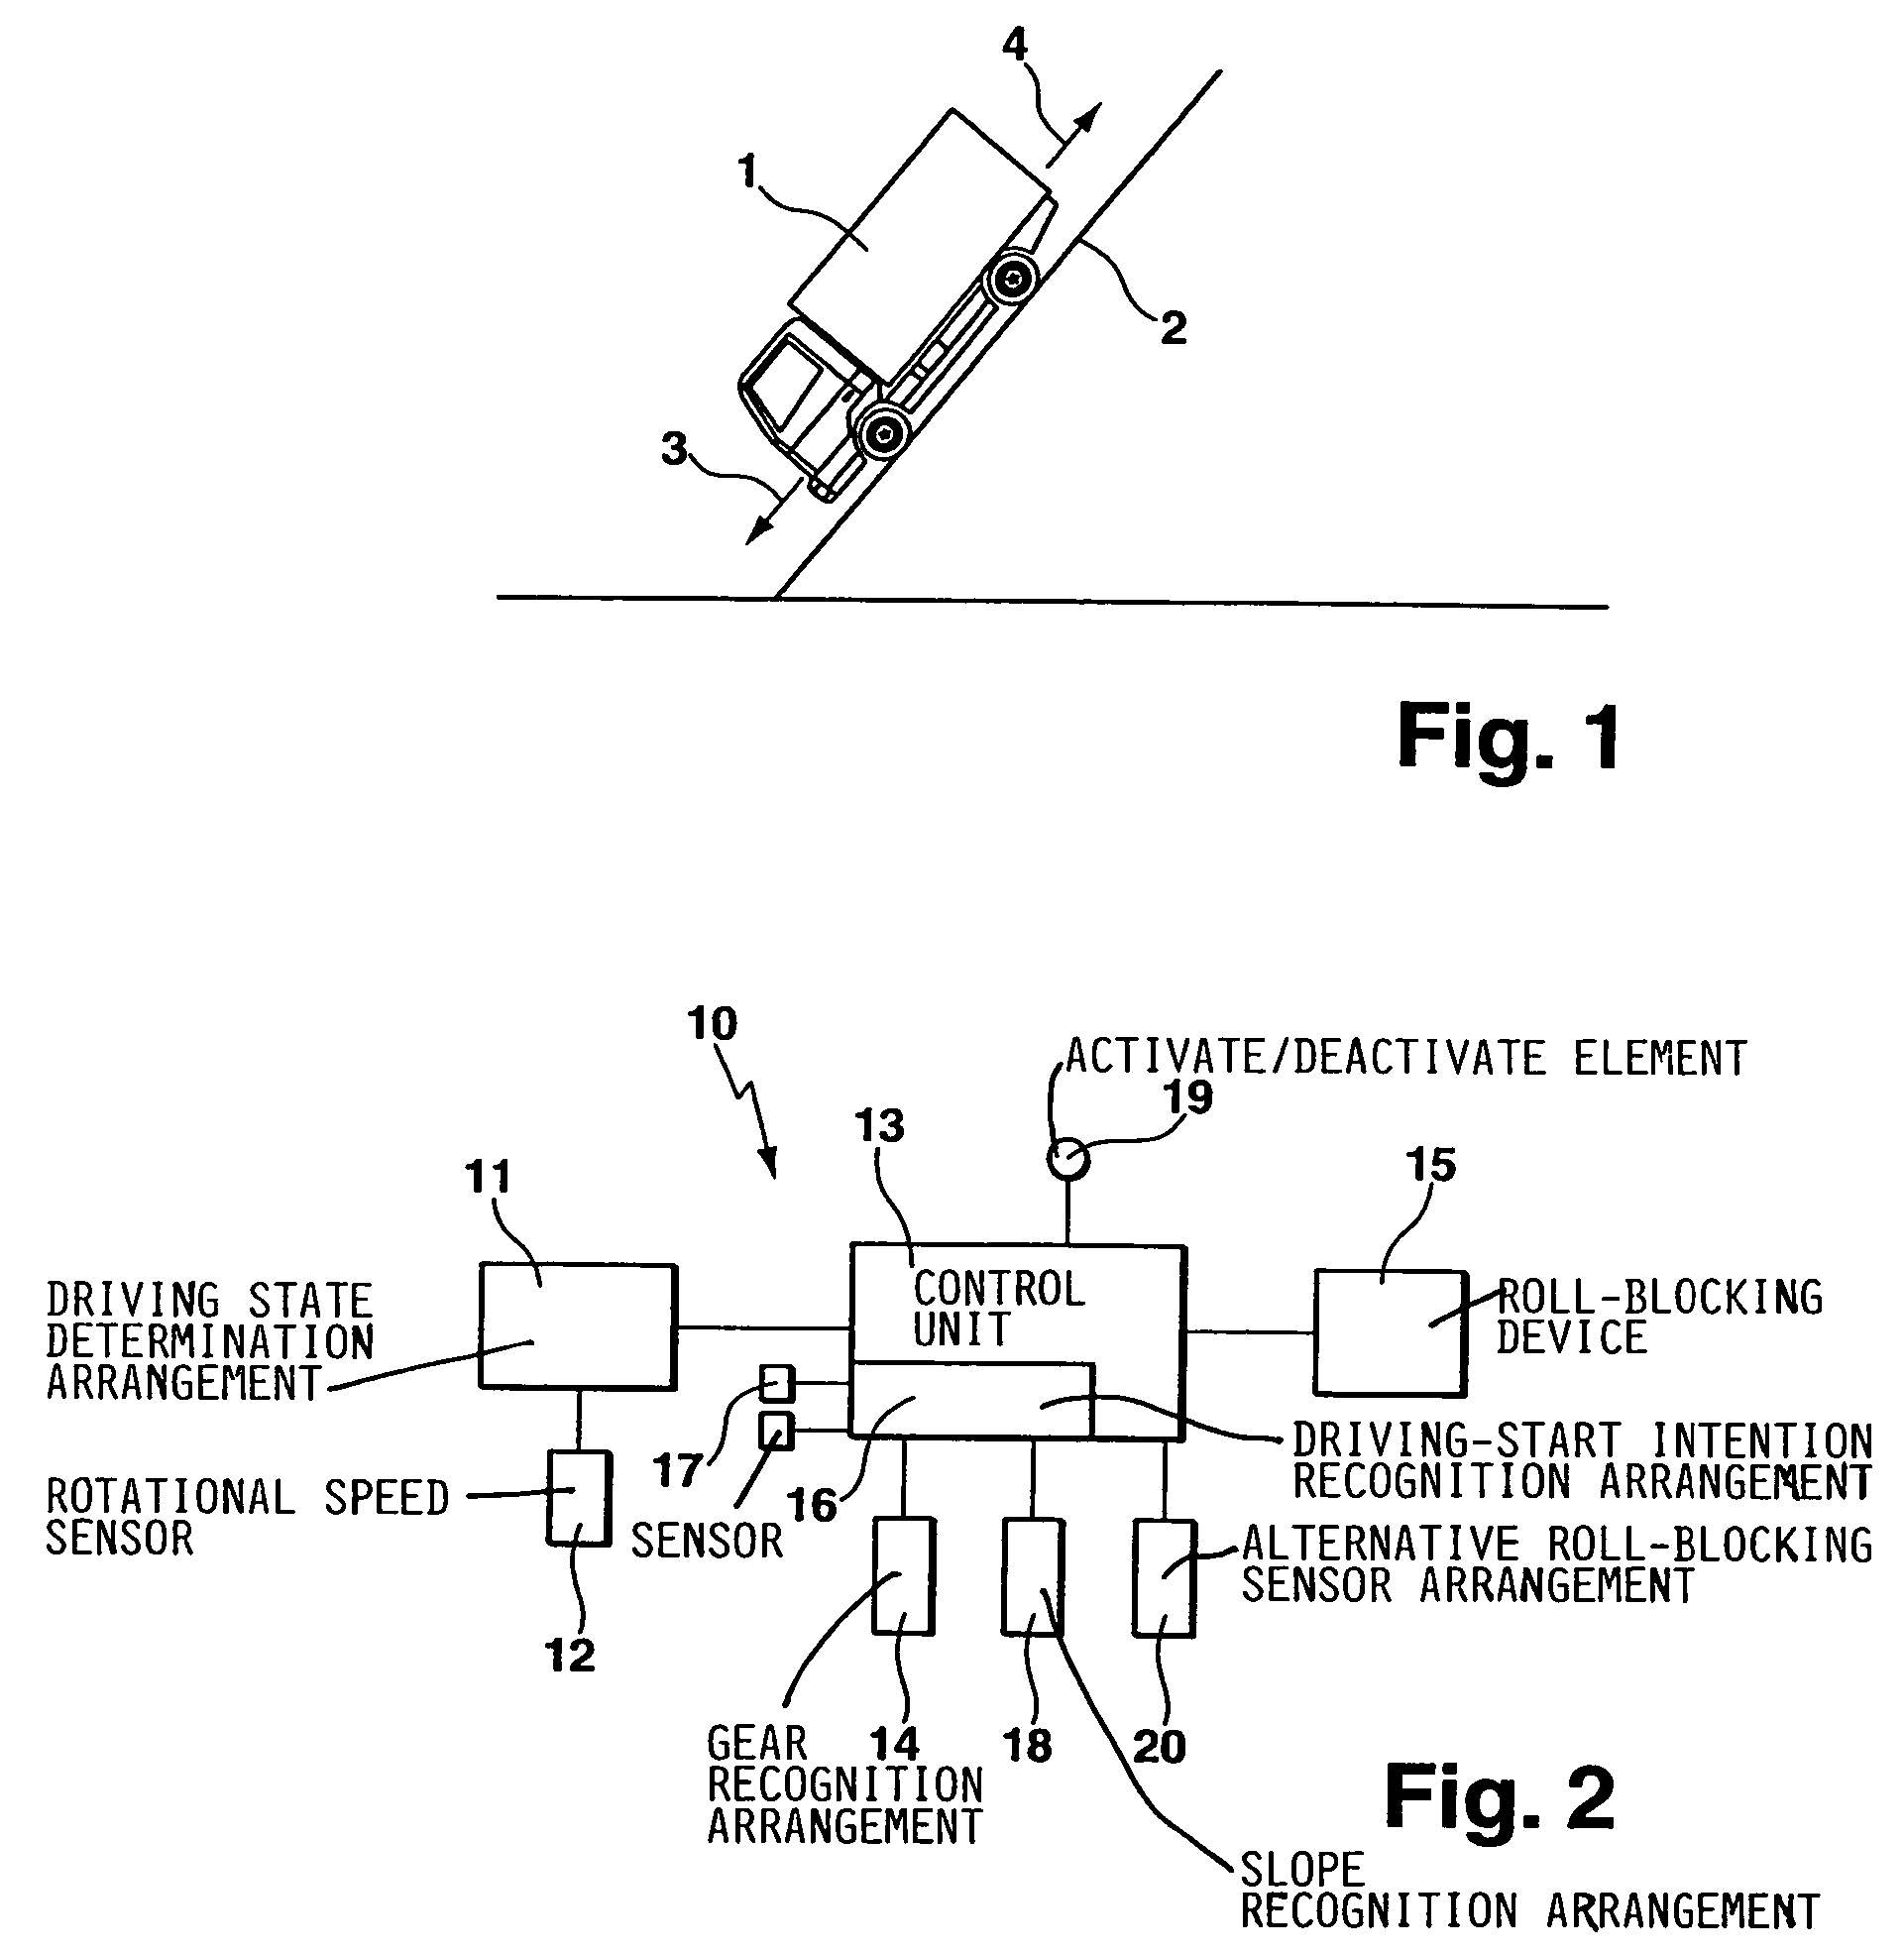 Method and system to prevent unintended rolling of a vehicle